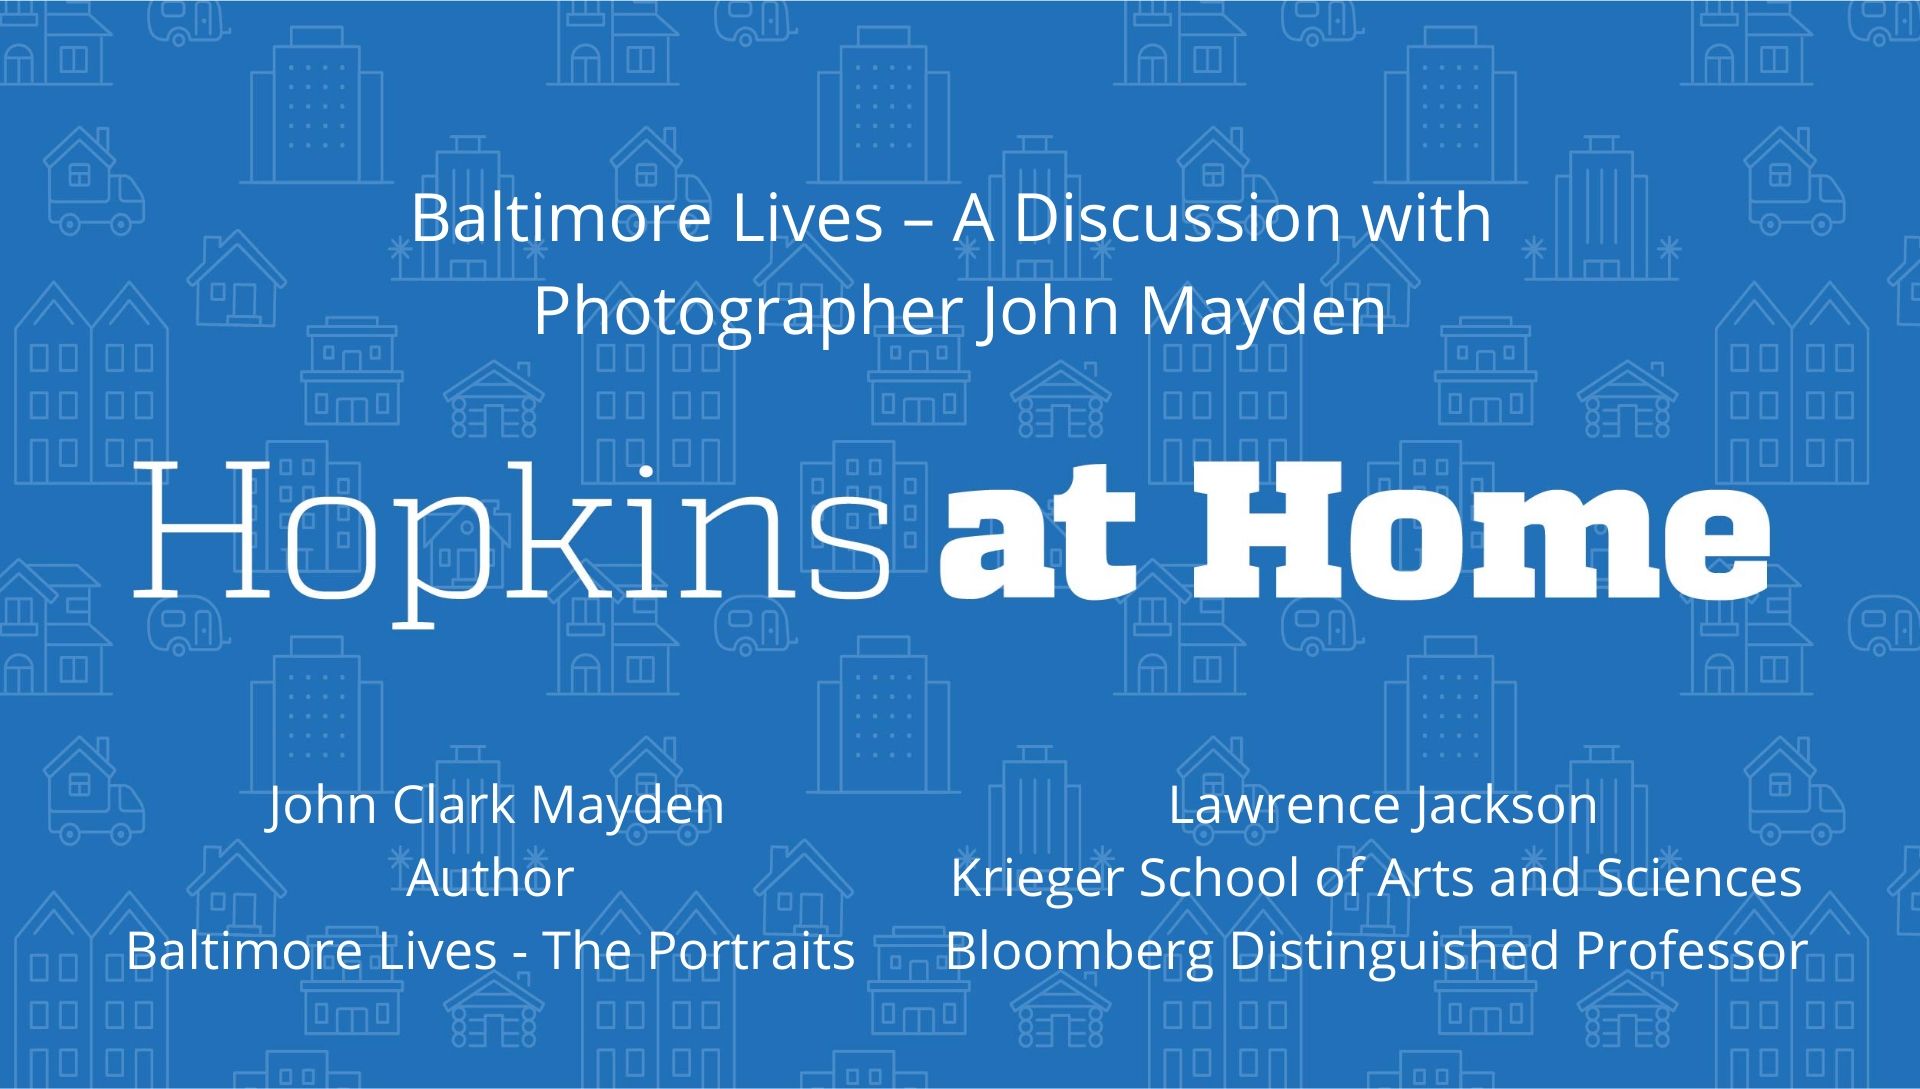 Baltimore Lives - A Discussion with Photographer John Mayden